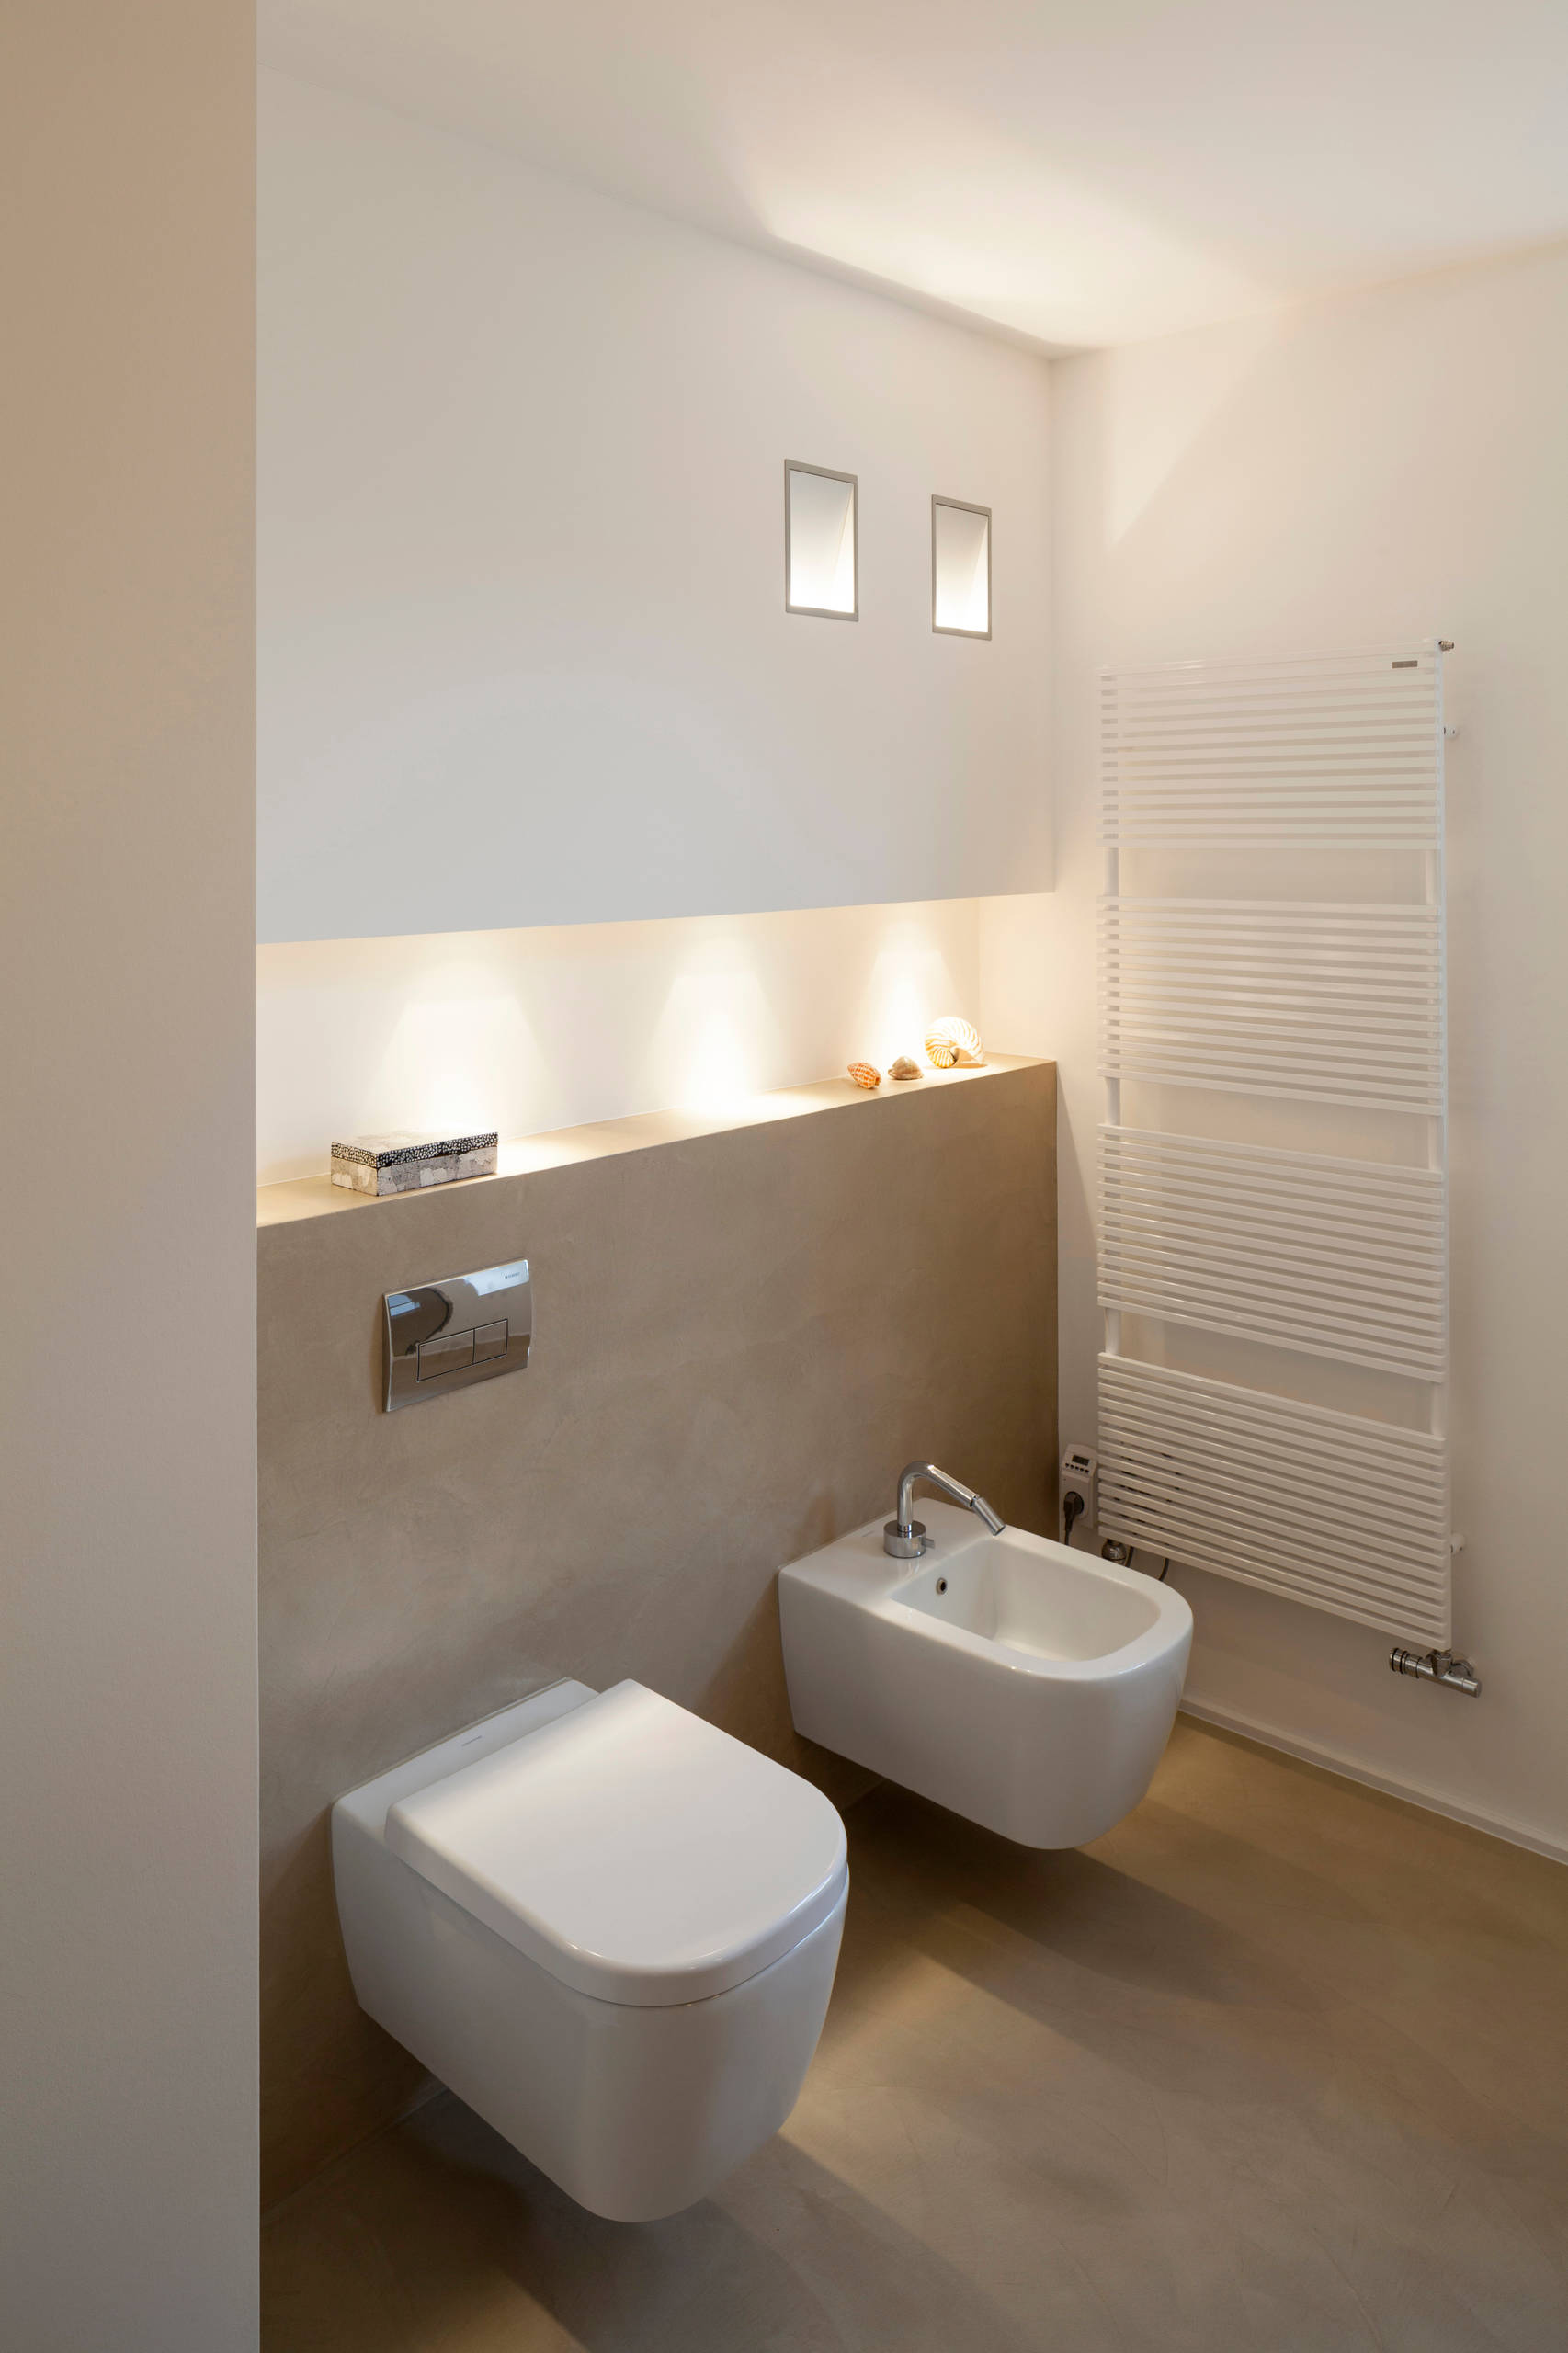 75 Bathroom with a Bidet and Solid Surface Countertops Ideas You'll Love -  August, 2022 | Houzz